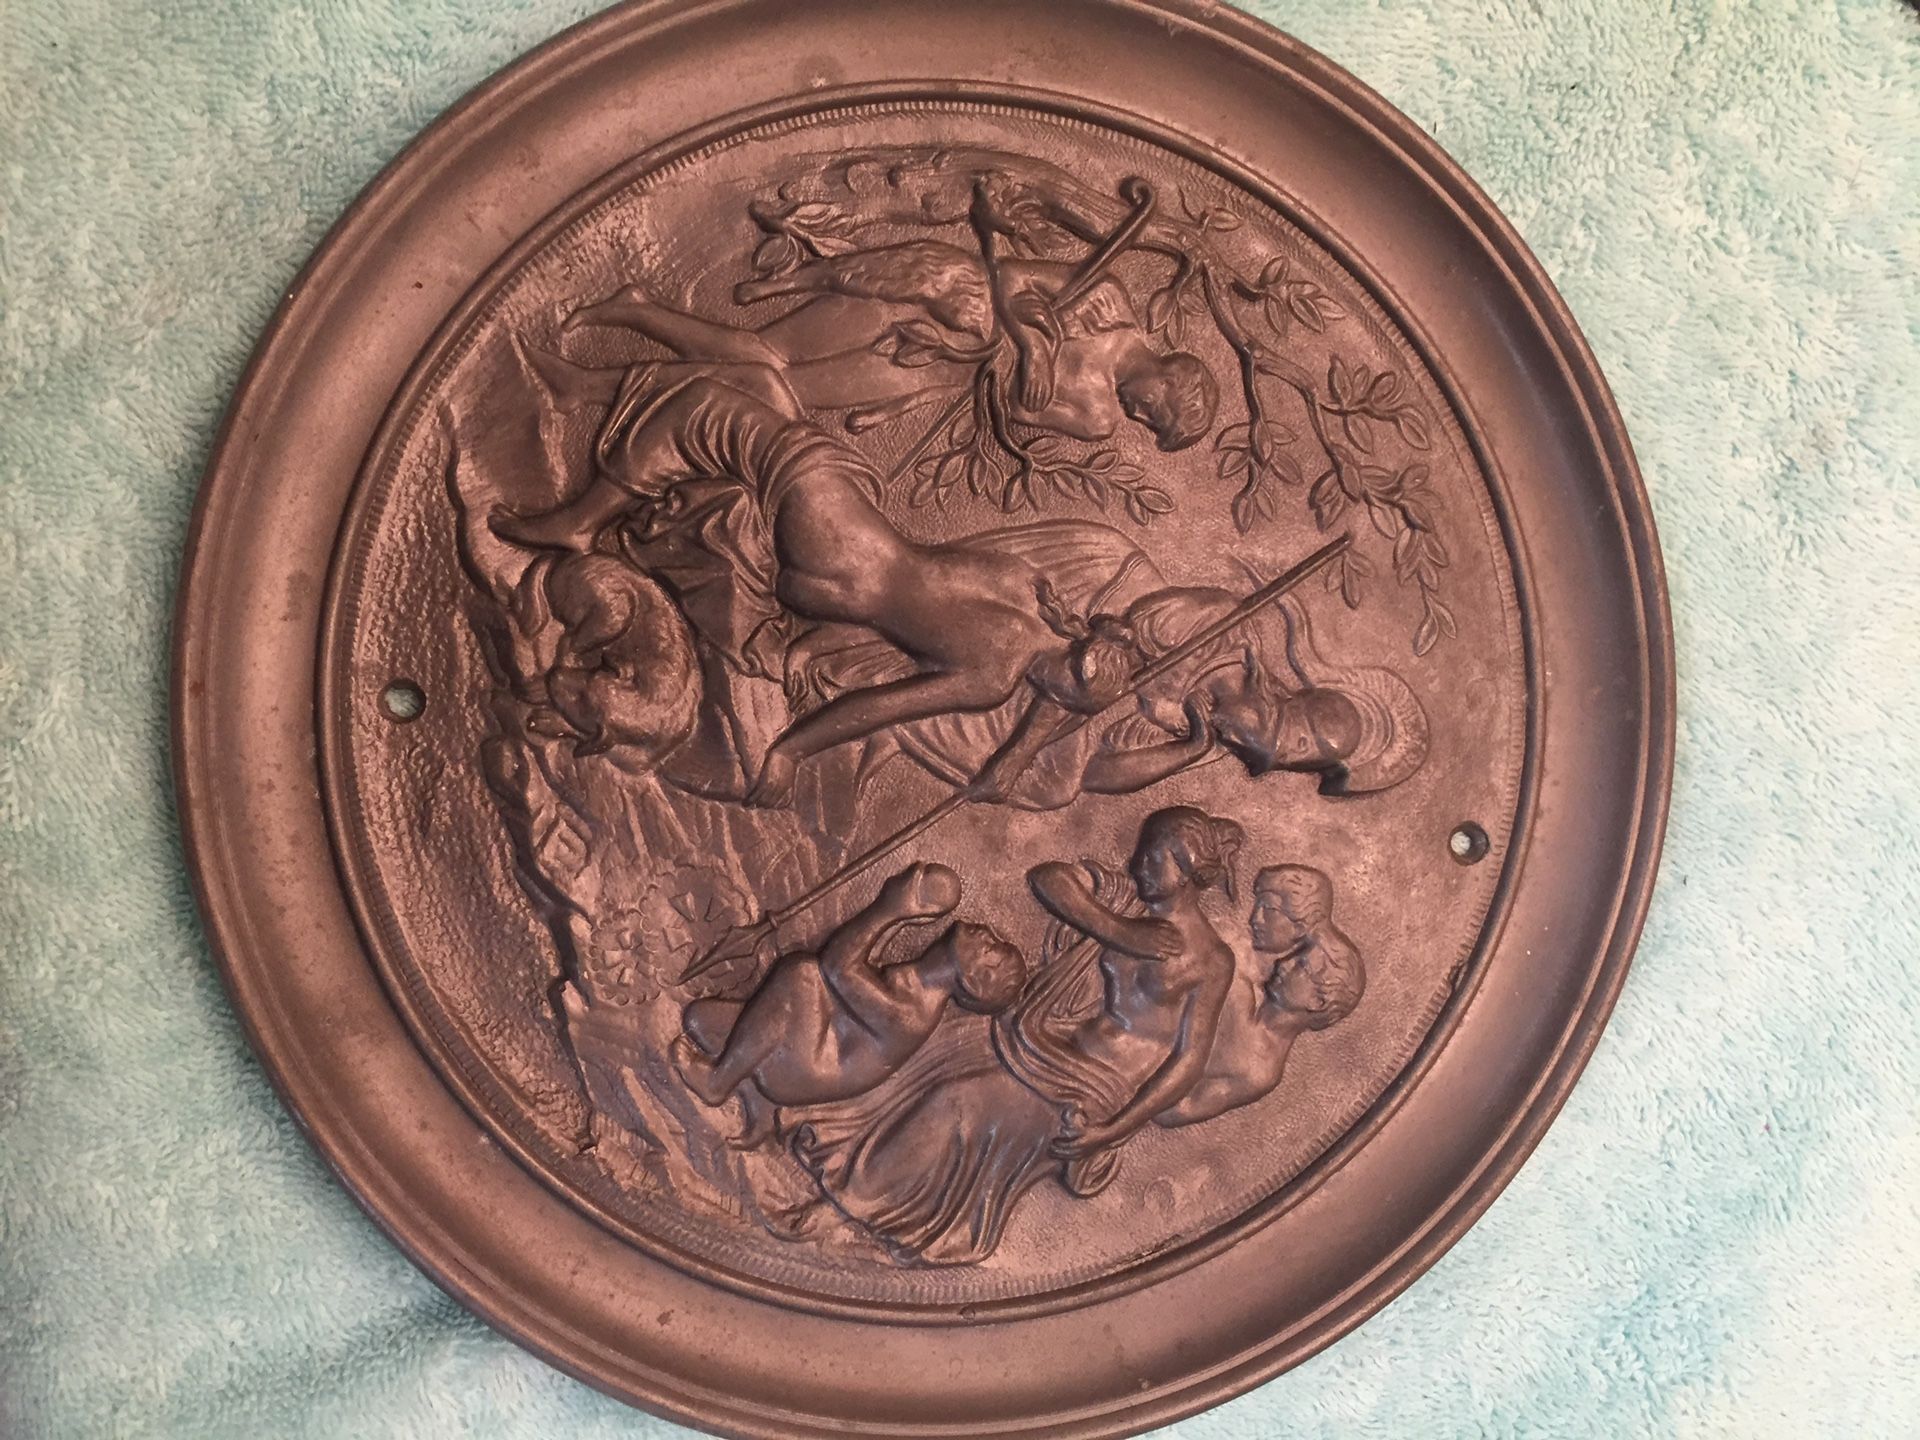 Super old heavy metal plates that have Roman carvings and other pictures check it out not sure what it was for